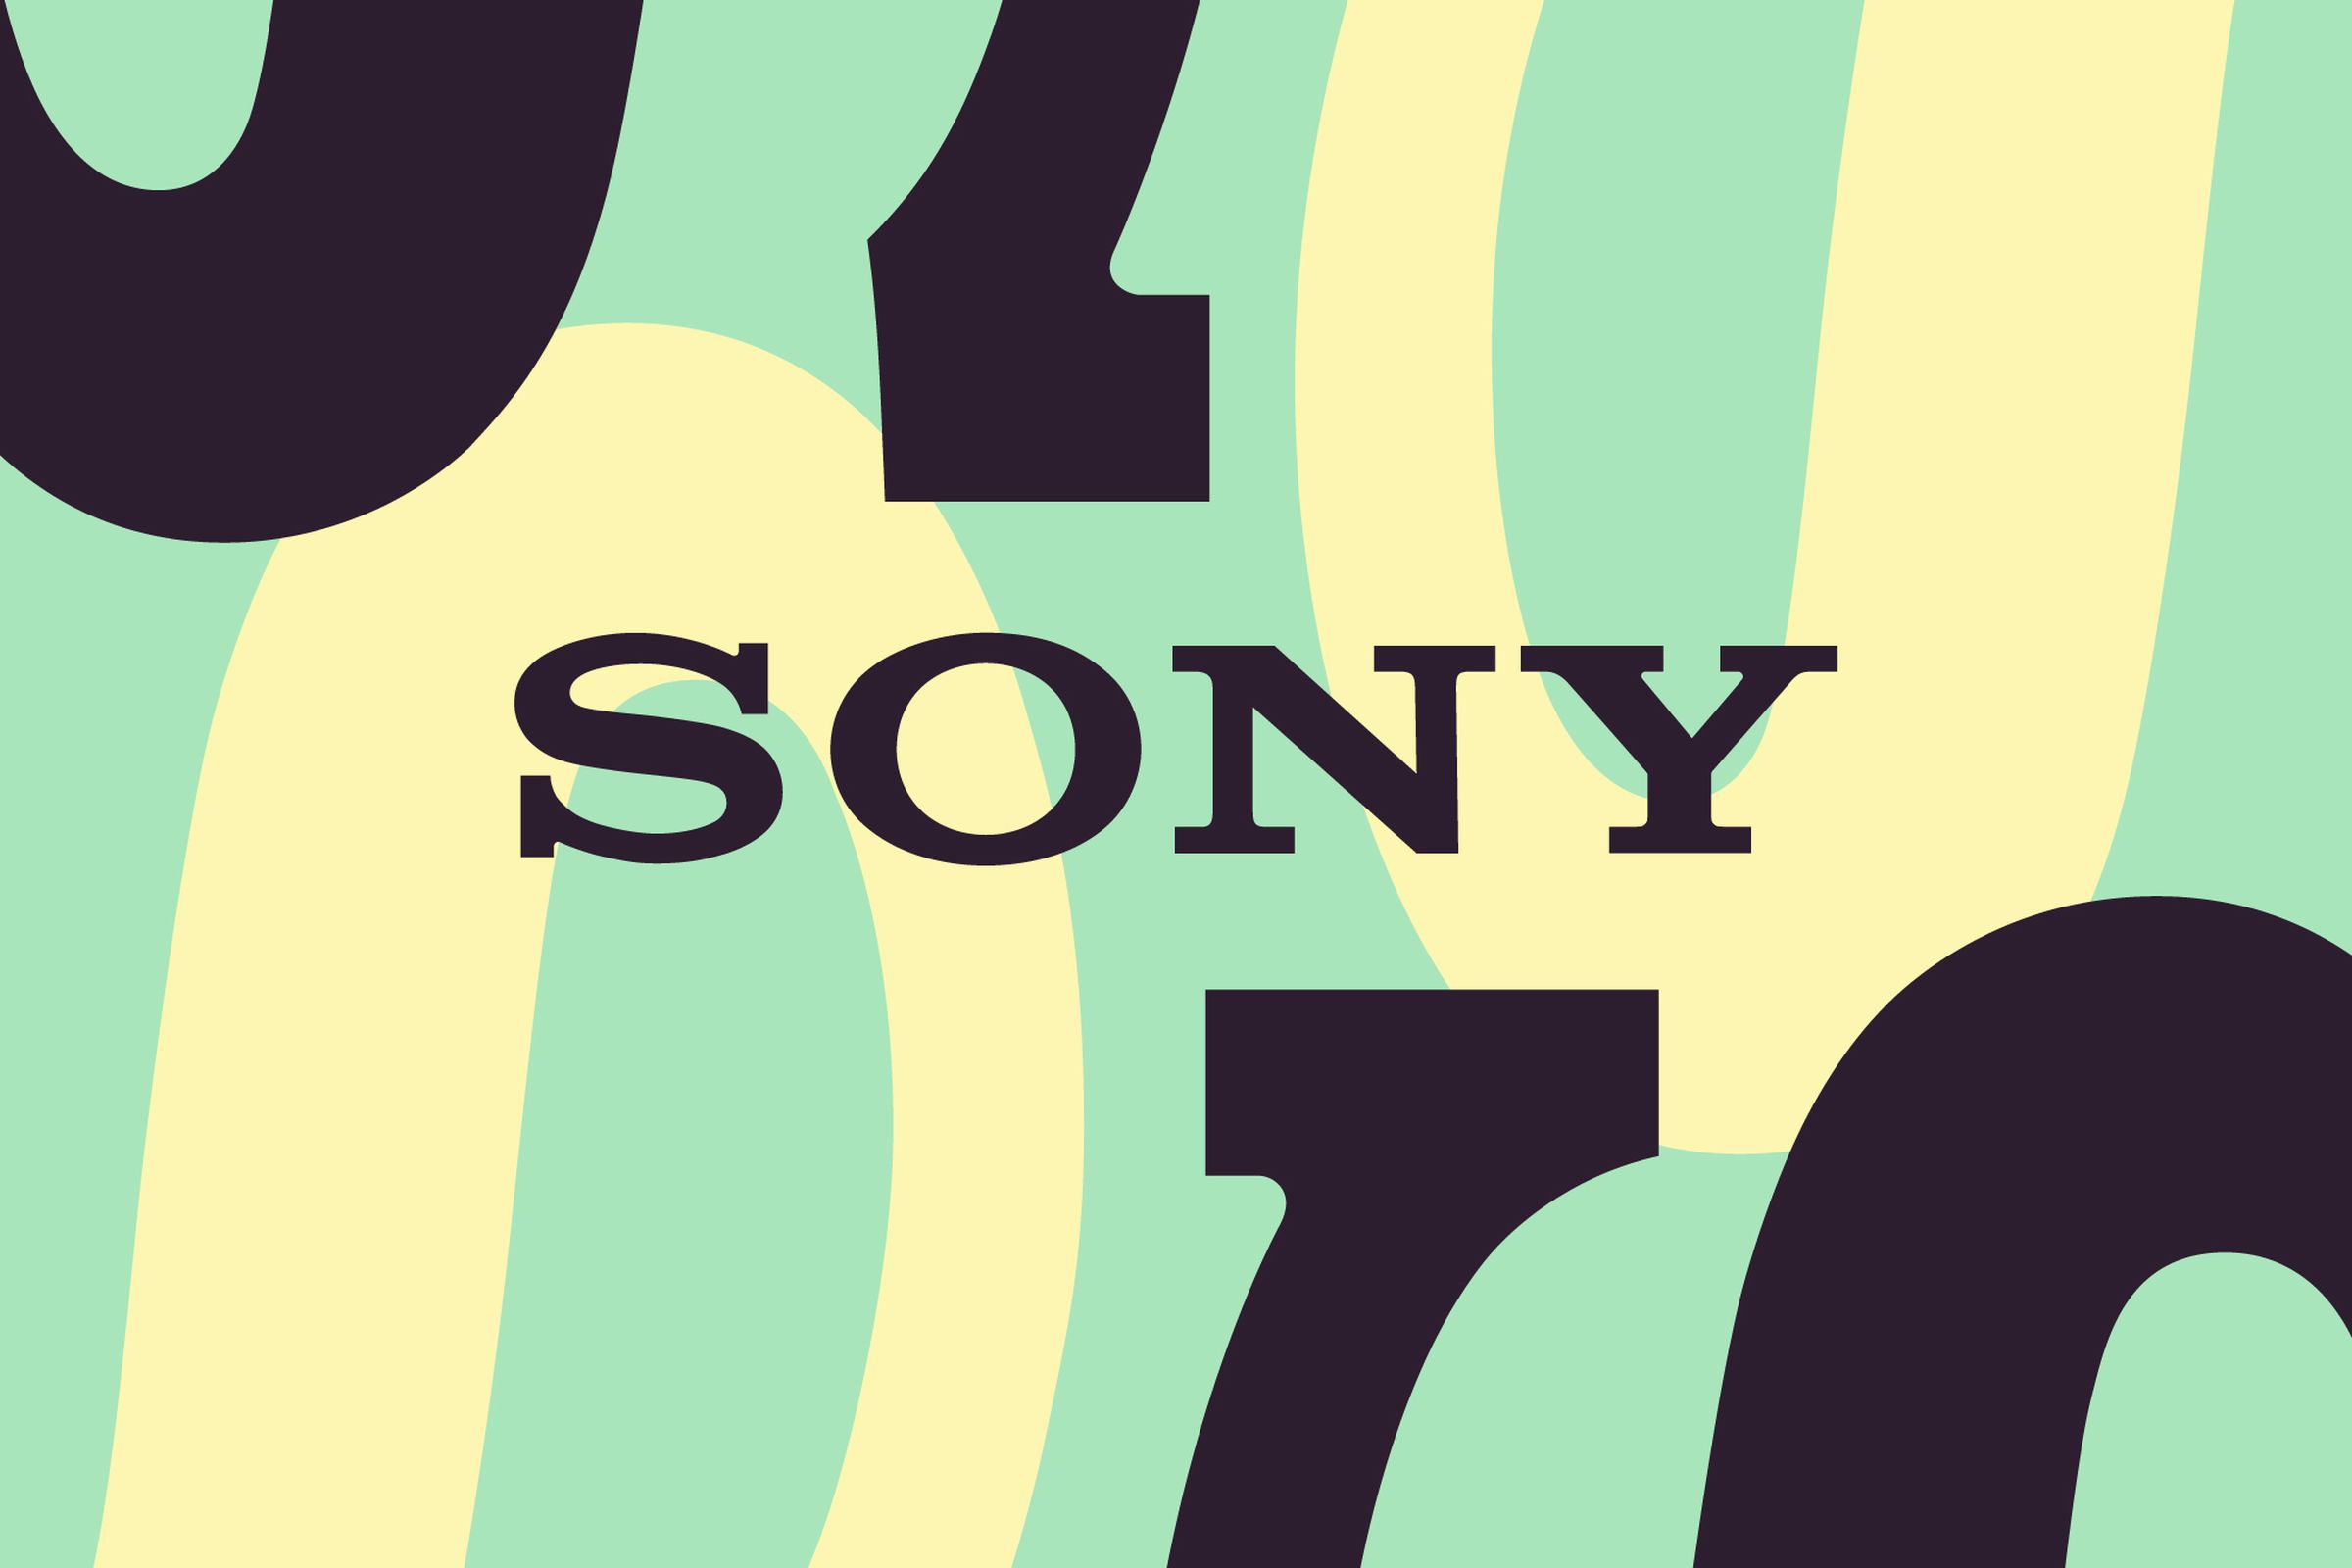 An illustration of the Sony logo.